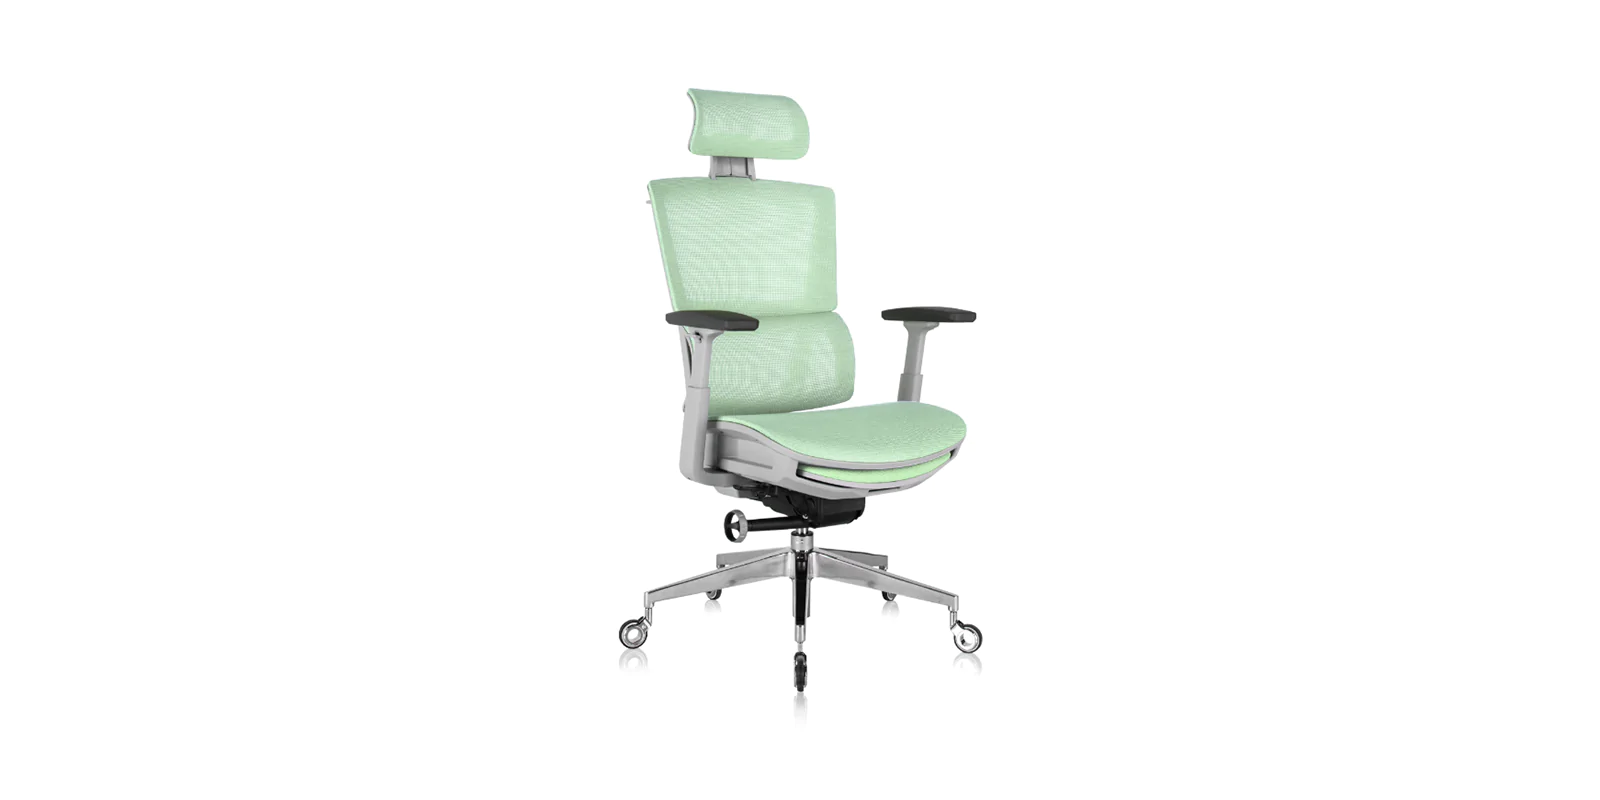 How do you make your office chair not hurt your back?